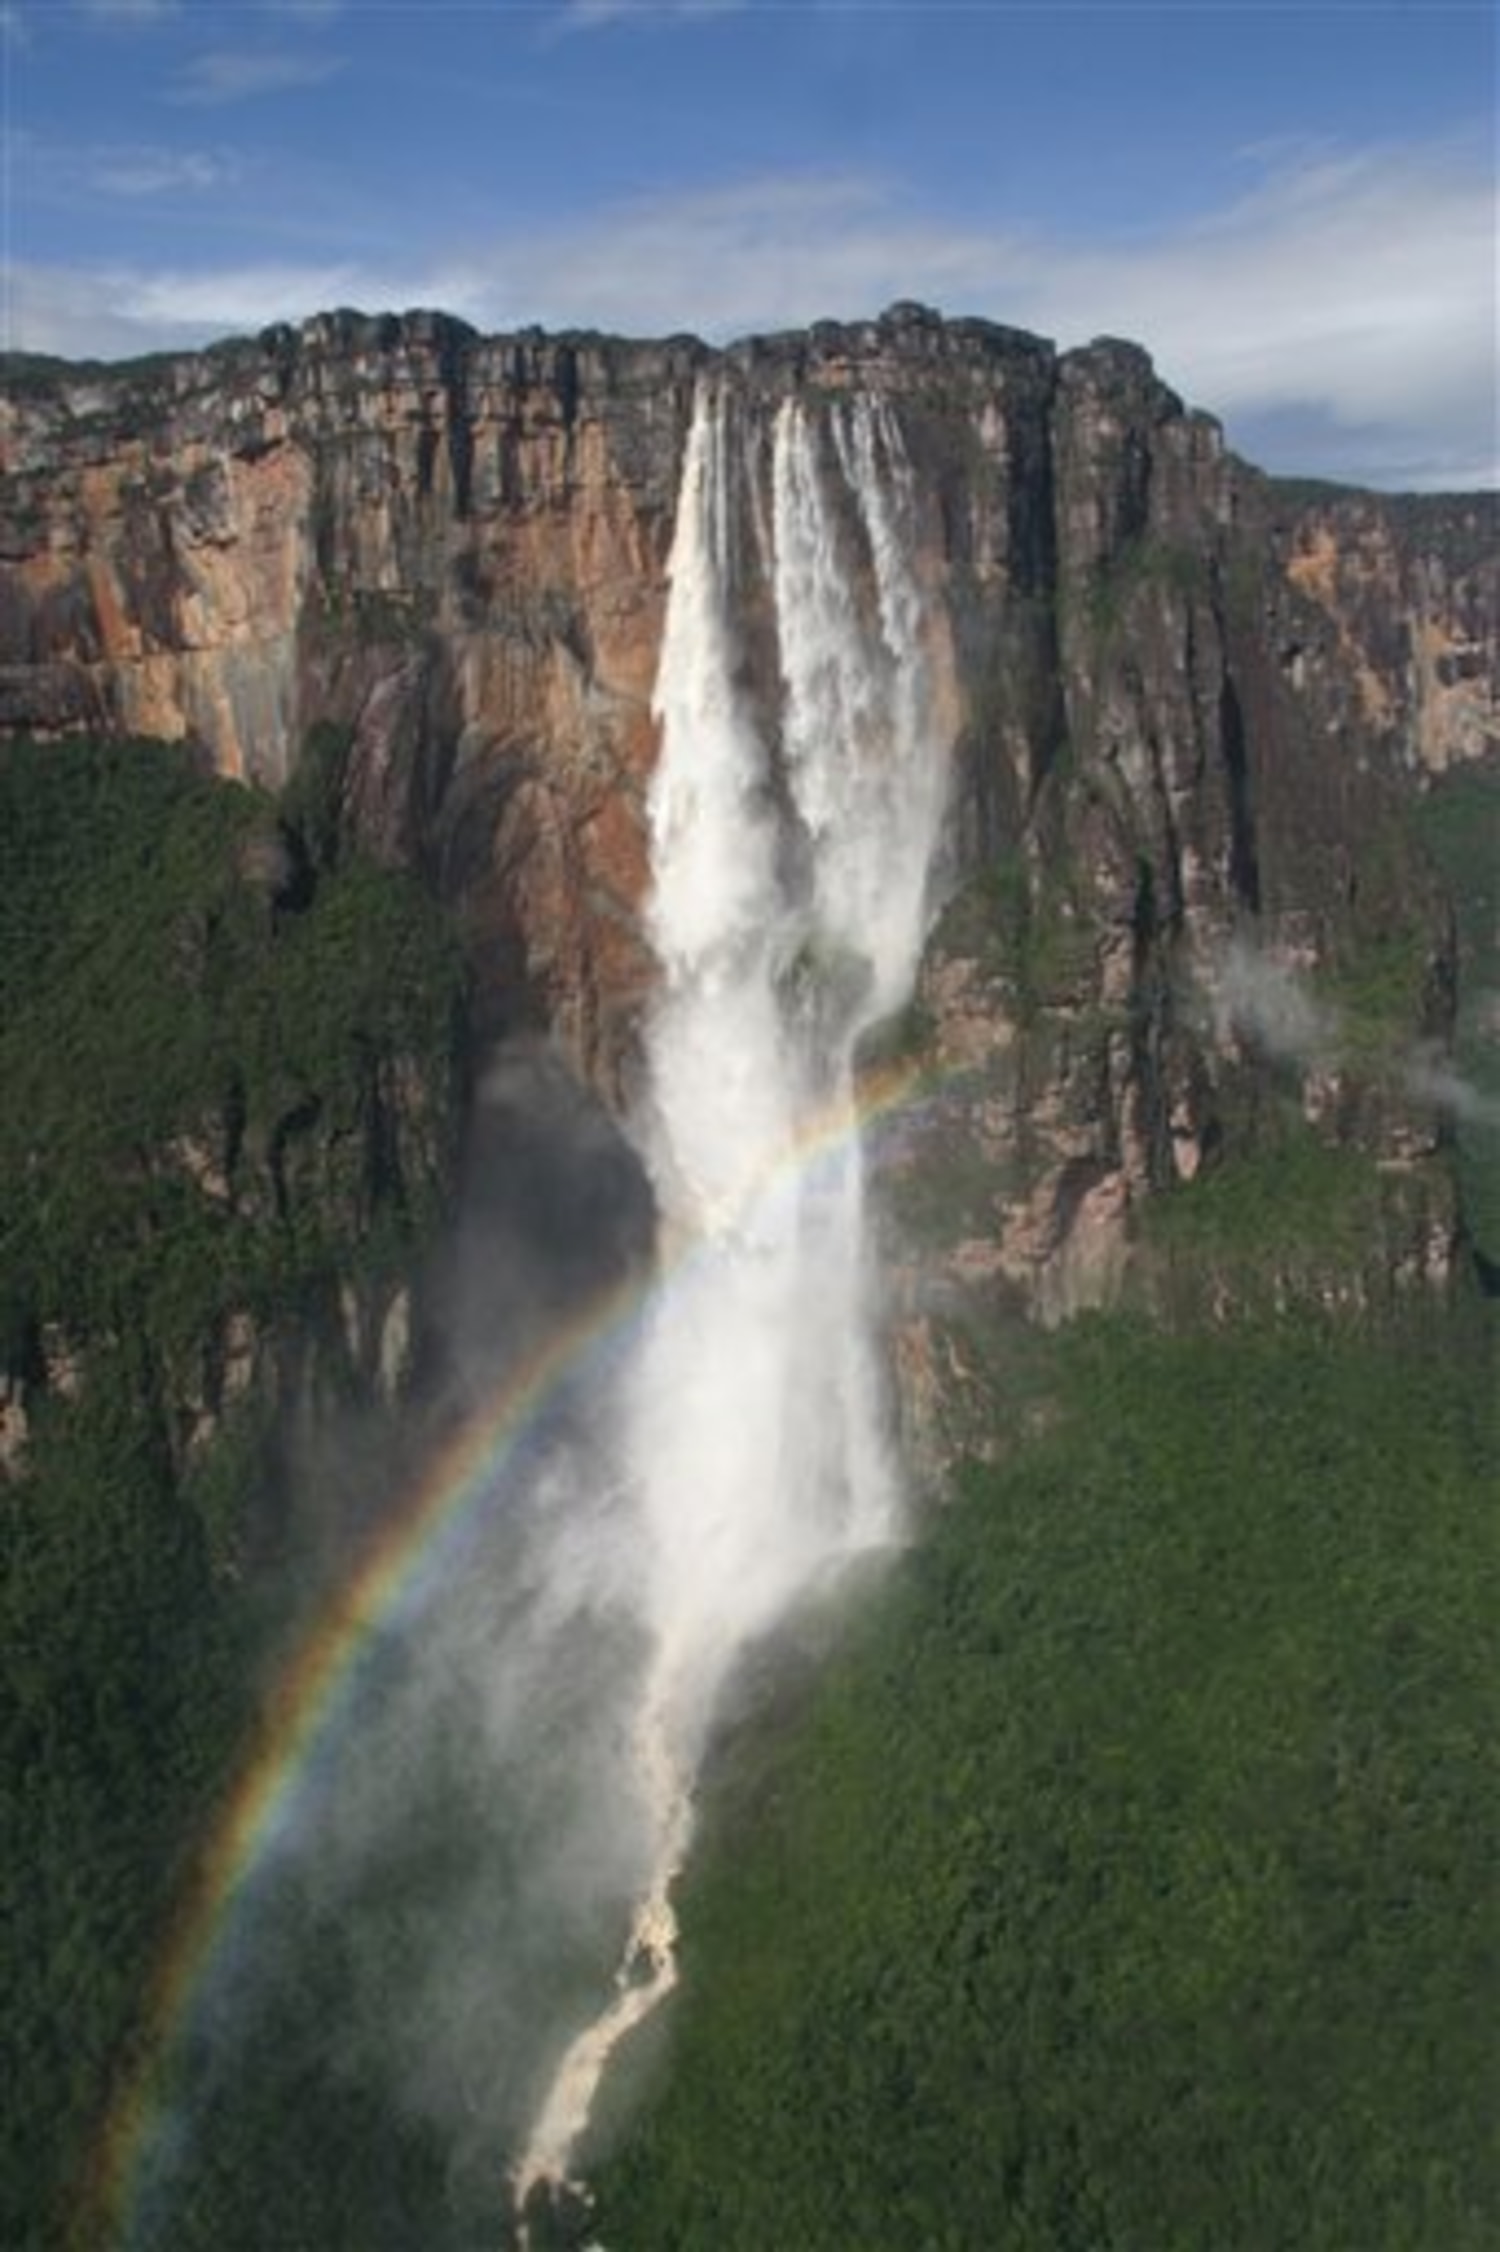 Paradise Falls in Up is based off of Angel Falls in Venezuela